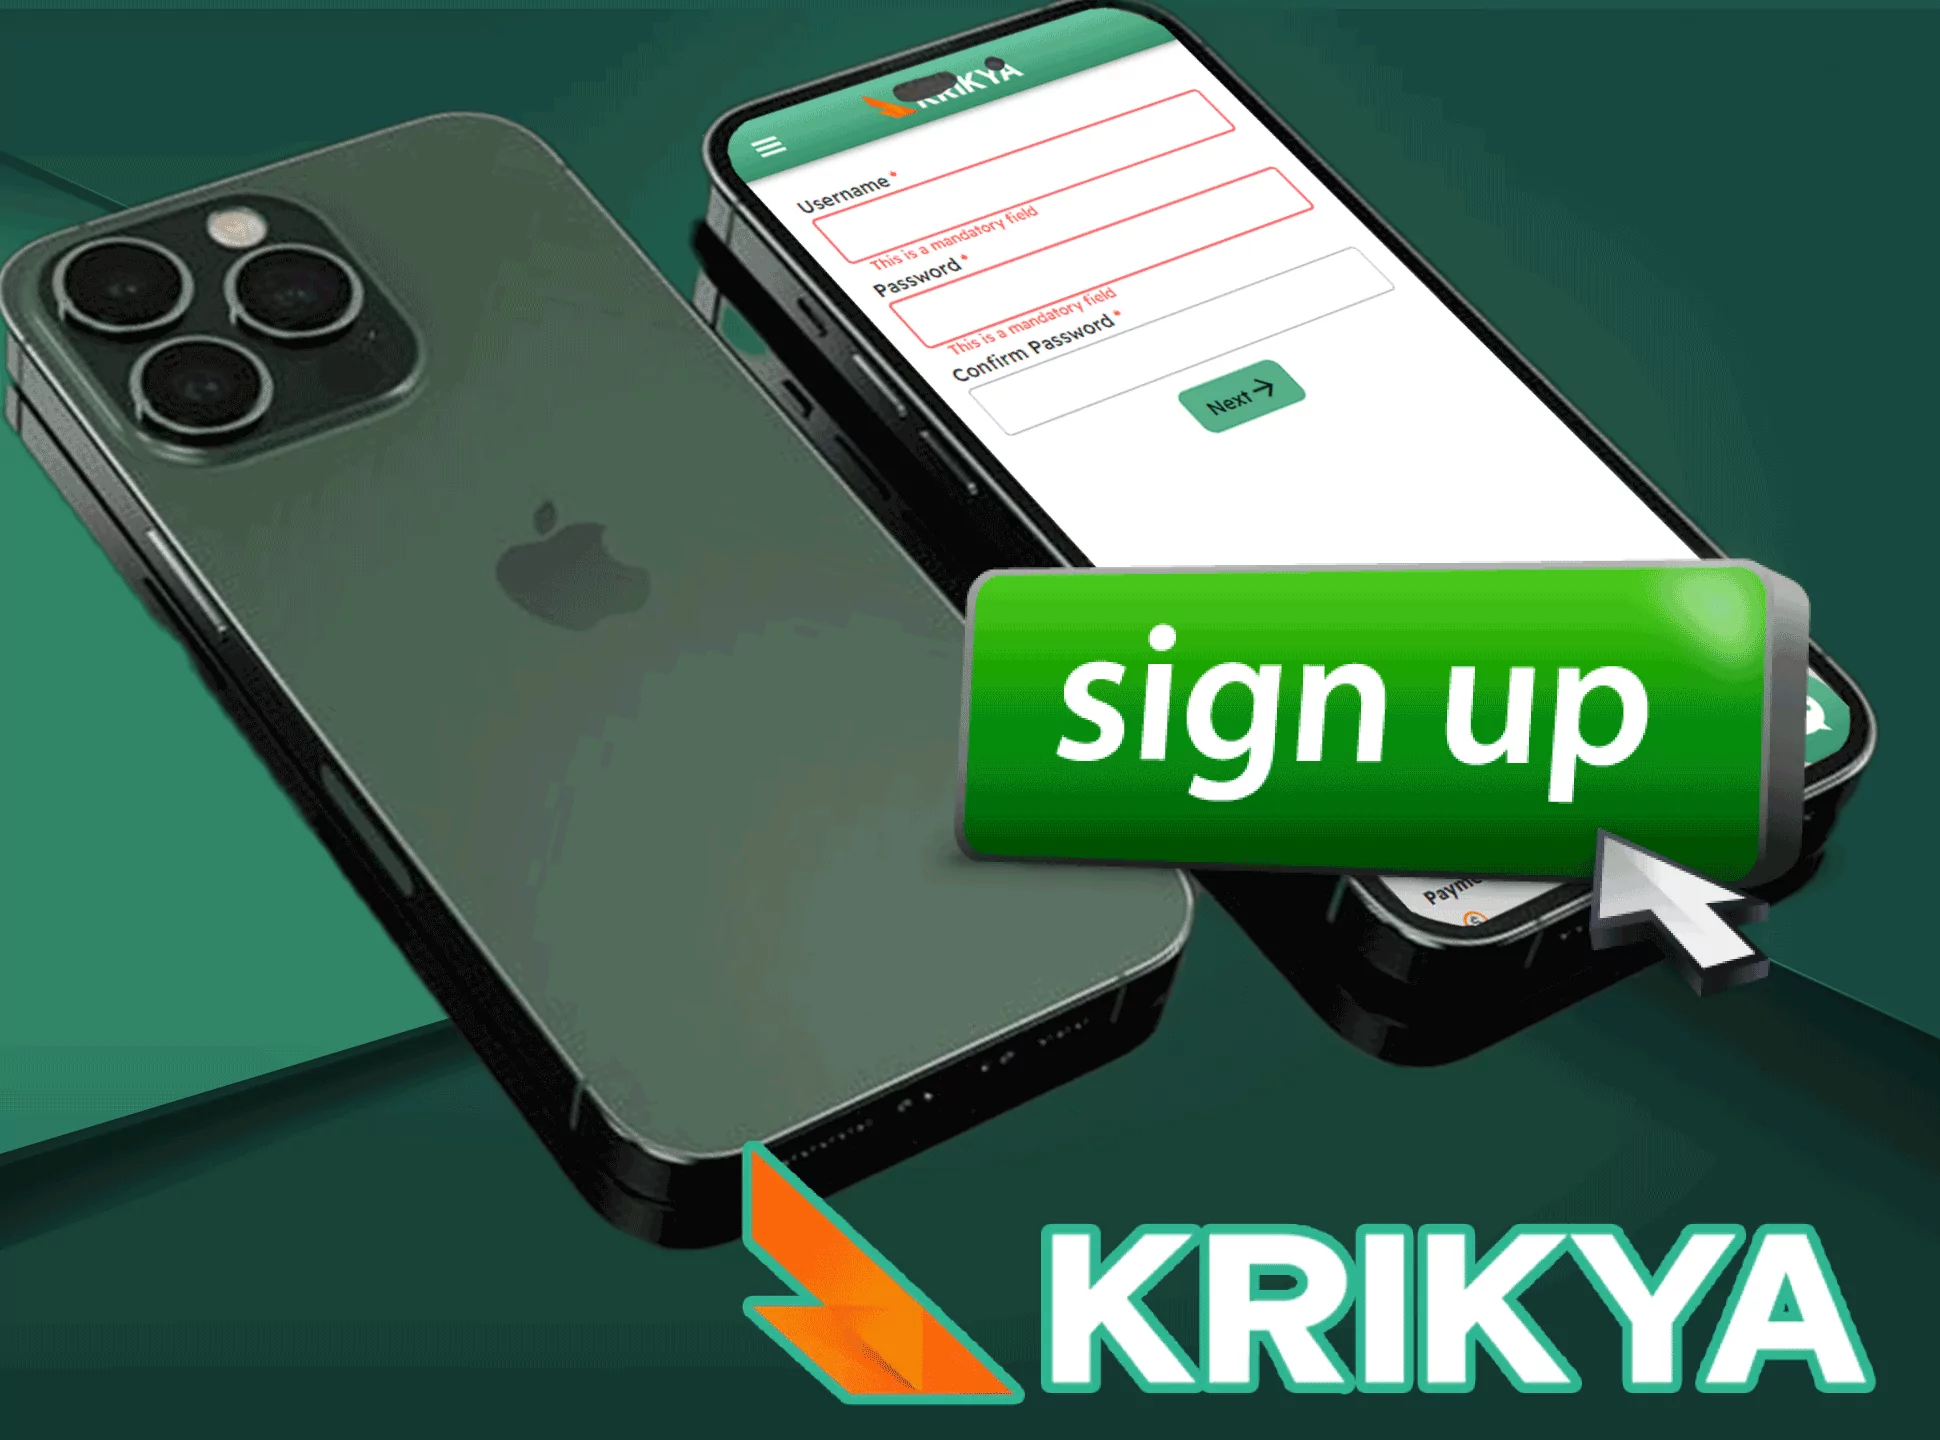 Sign up for Krikya via your smartphone and start playing.